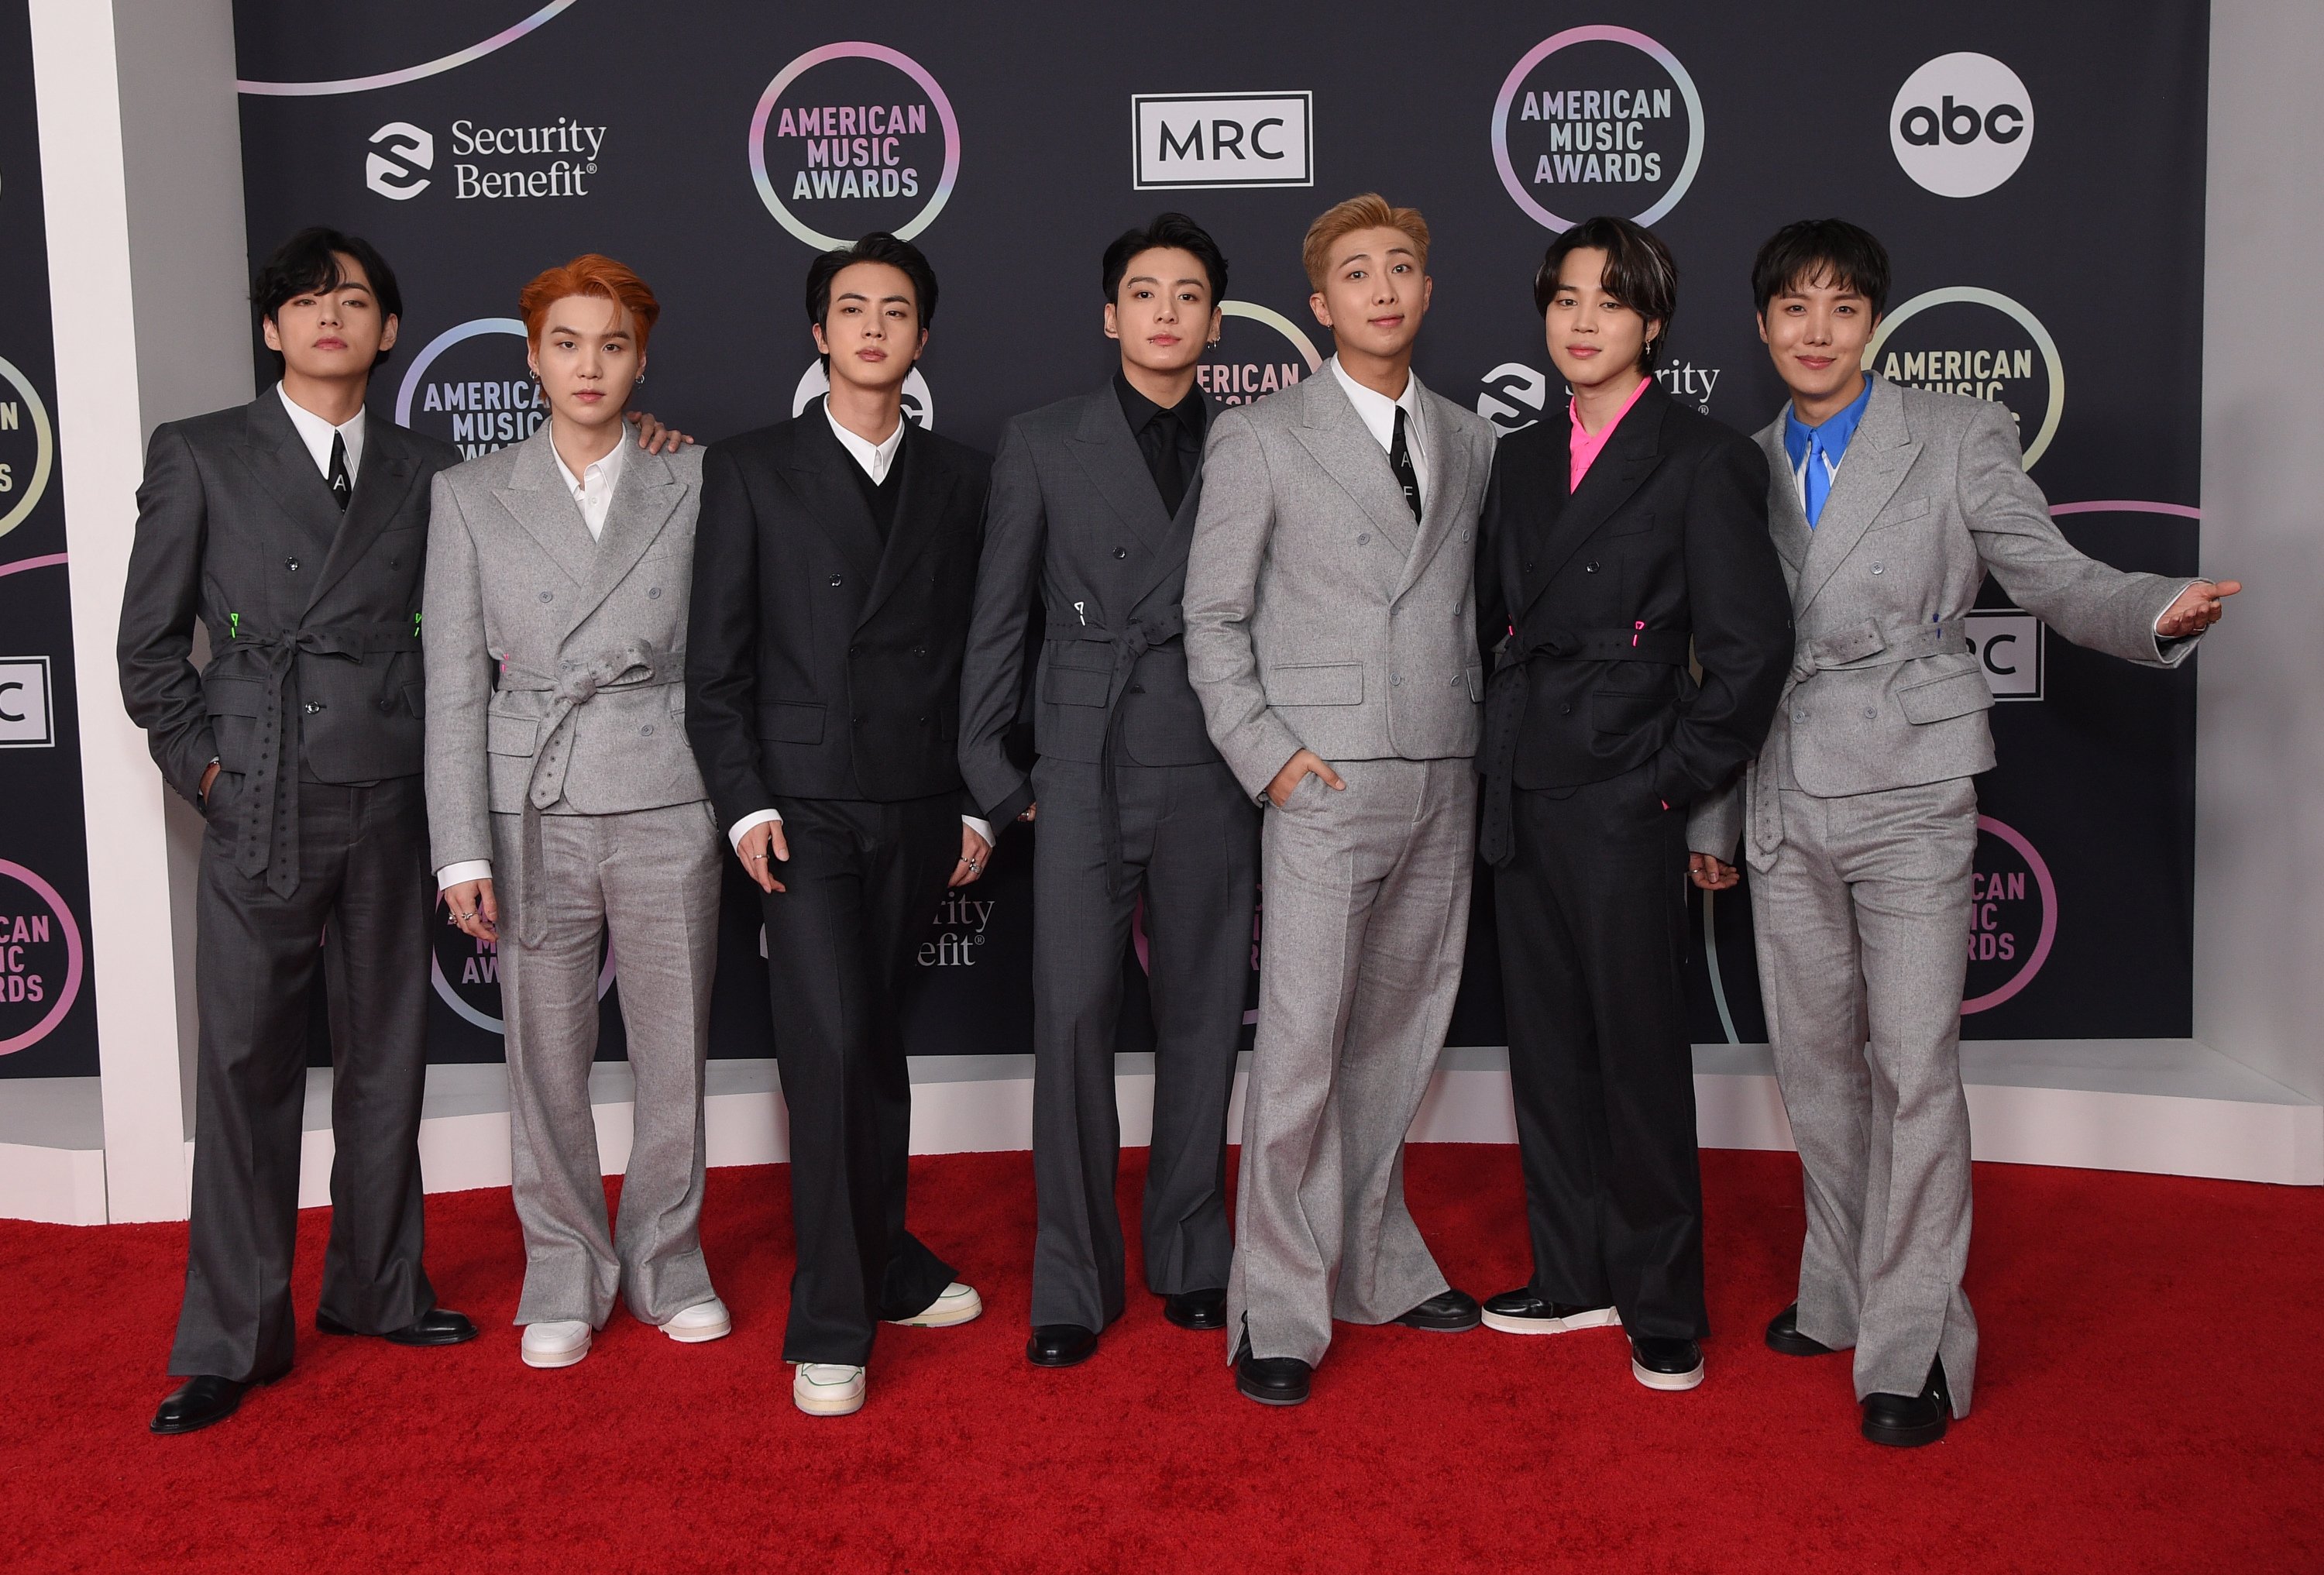 'Artist of the Year' recipient, BTS, at the American Music Awards (AMAs)